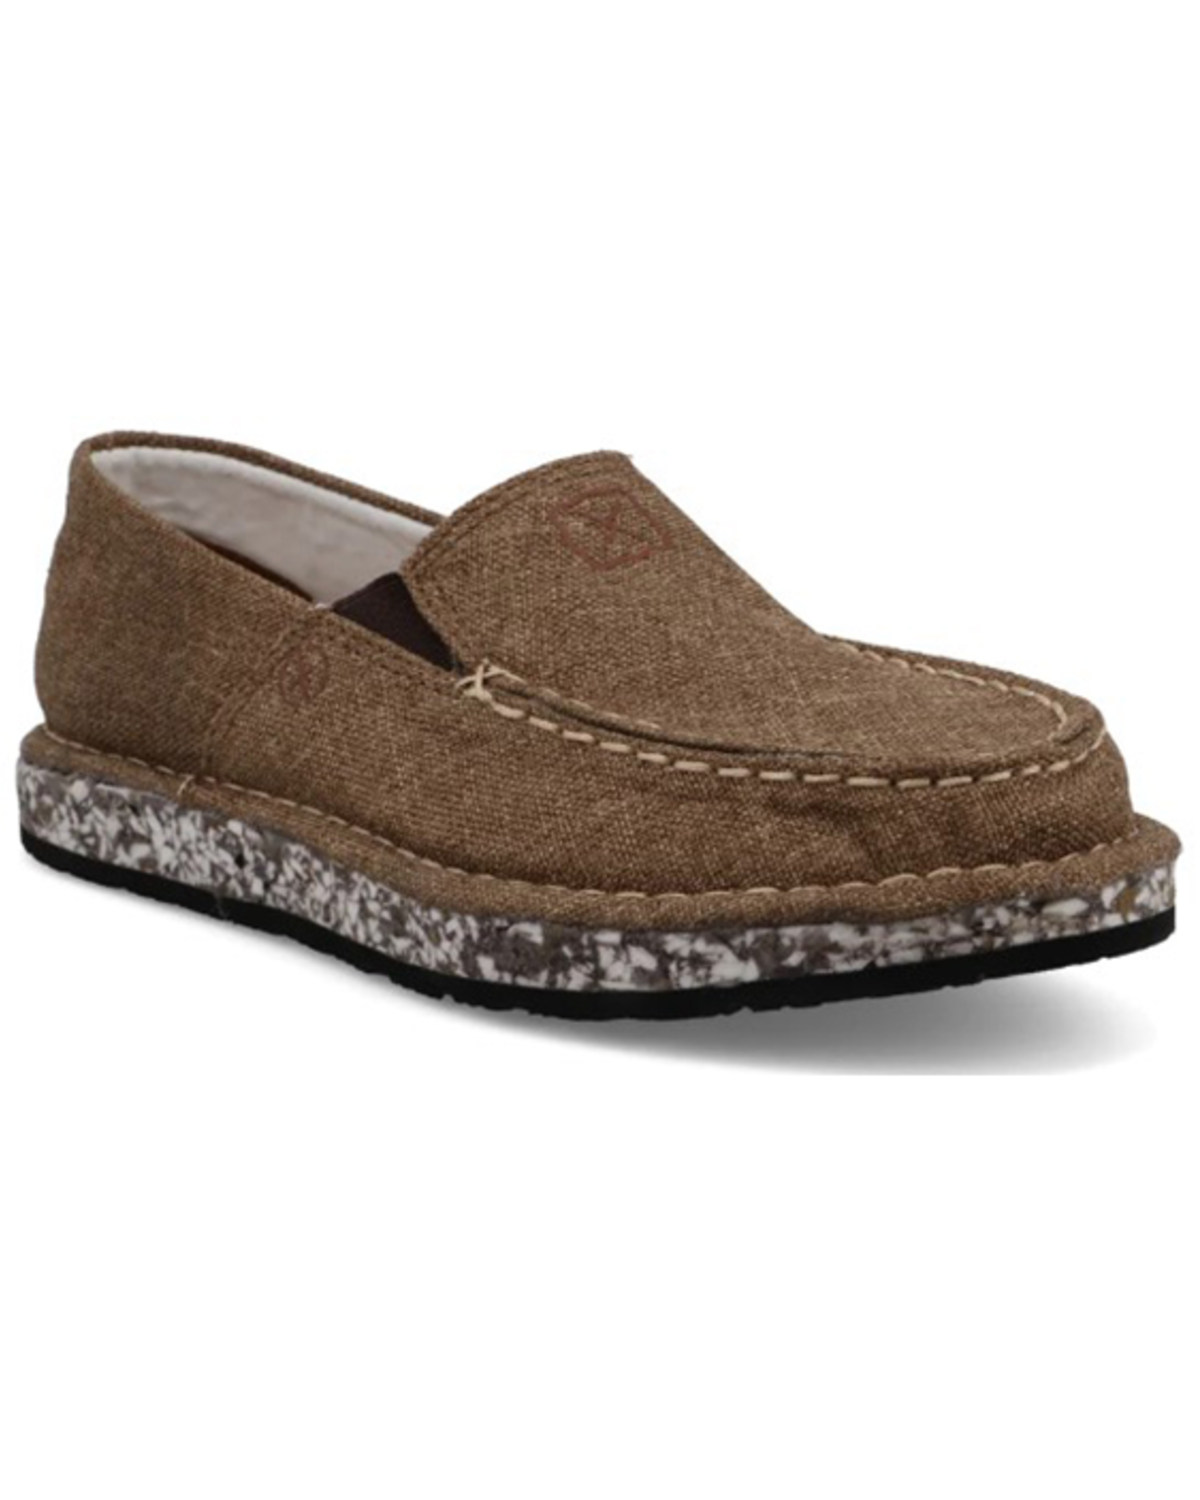 Twisted X Women's Circular Project™ Slip-On Shoes - Moc Toe